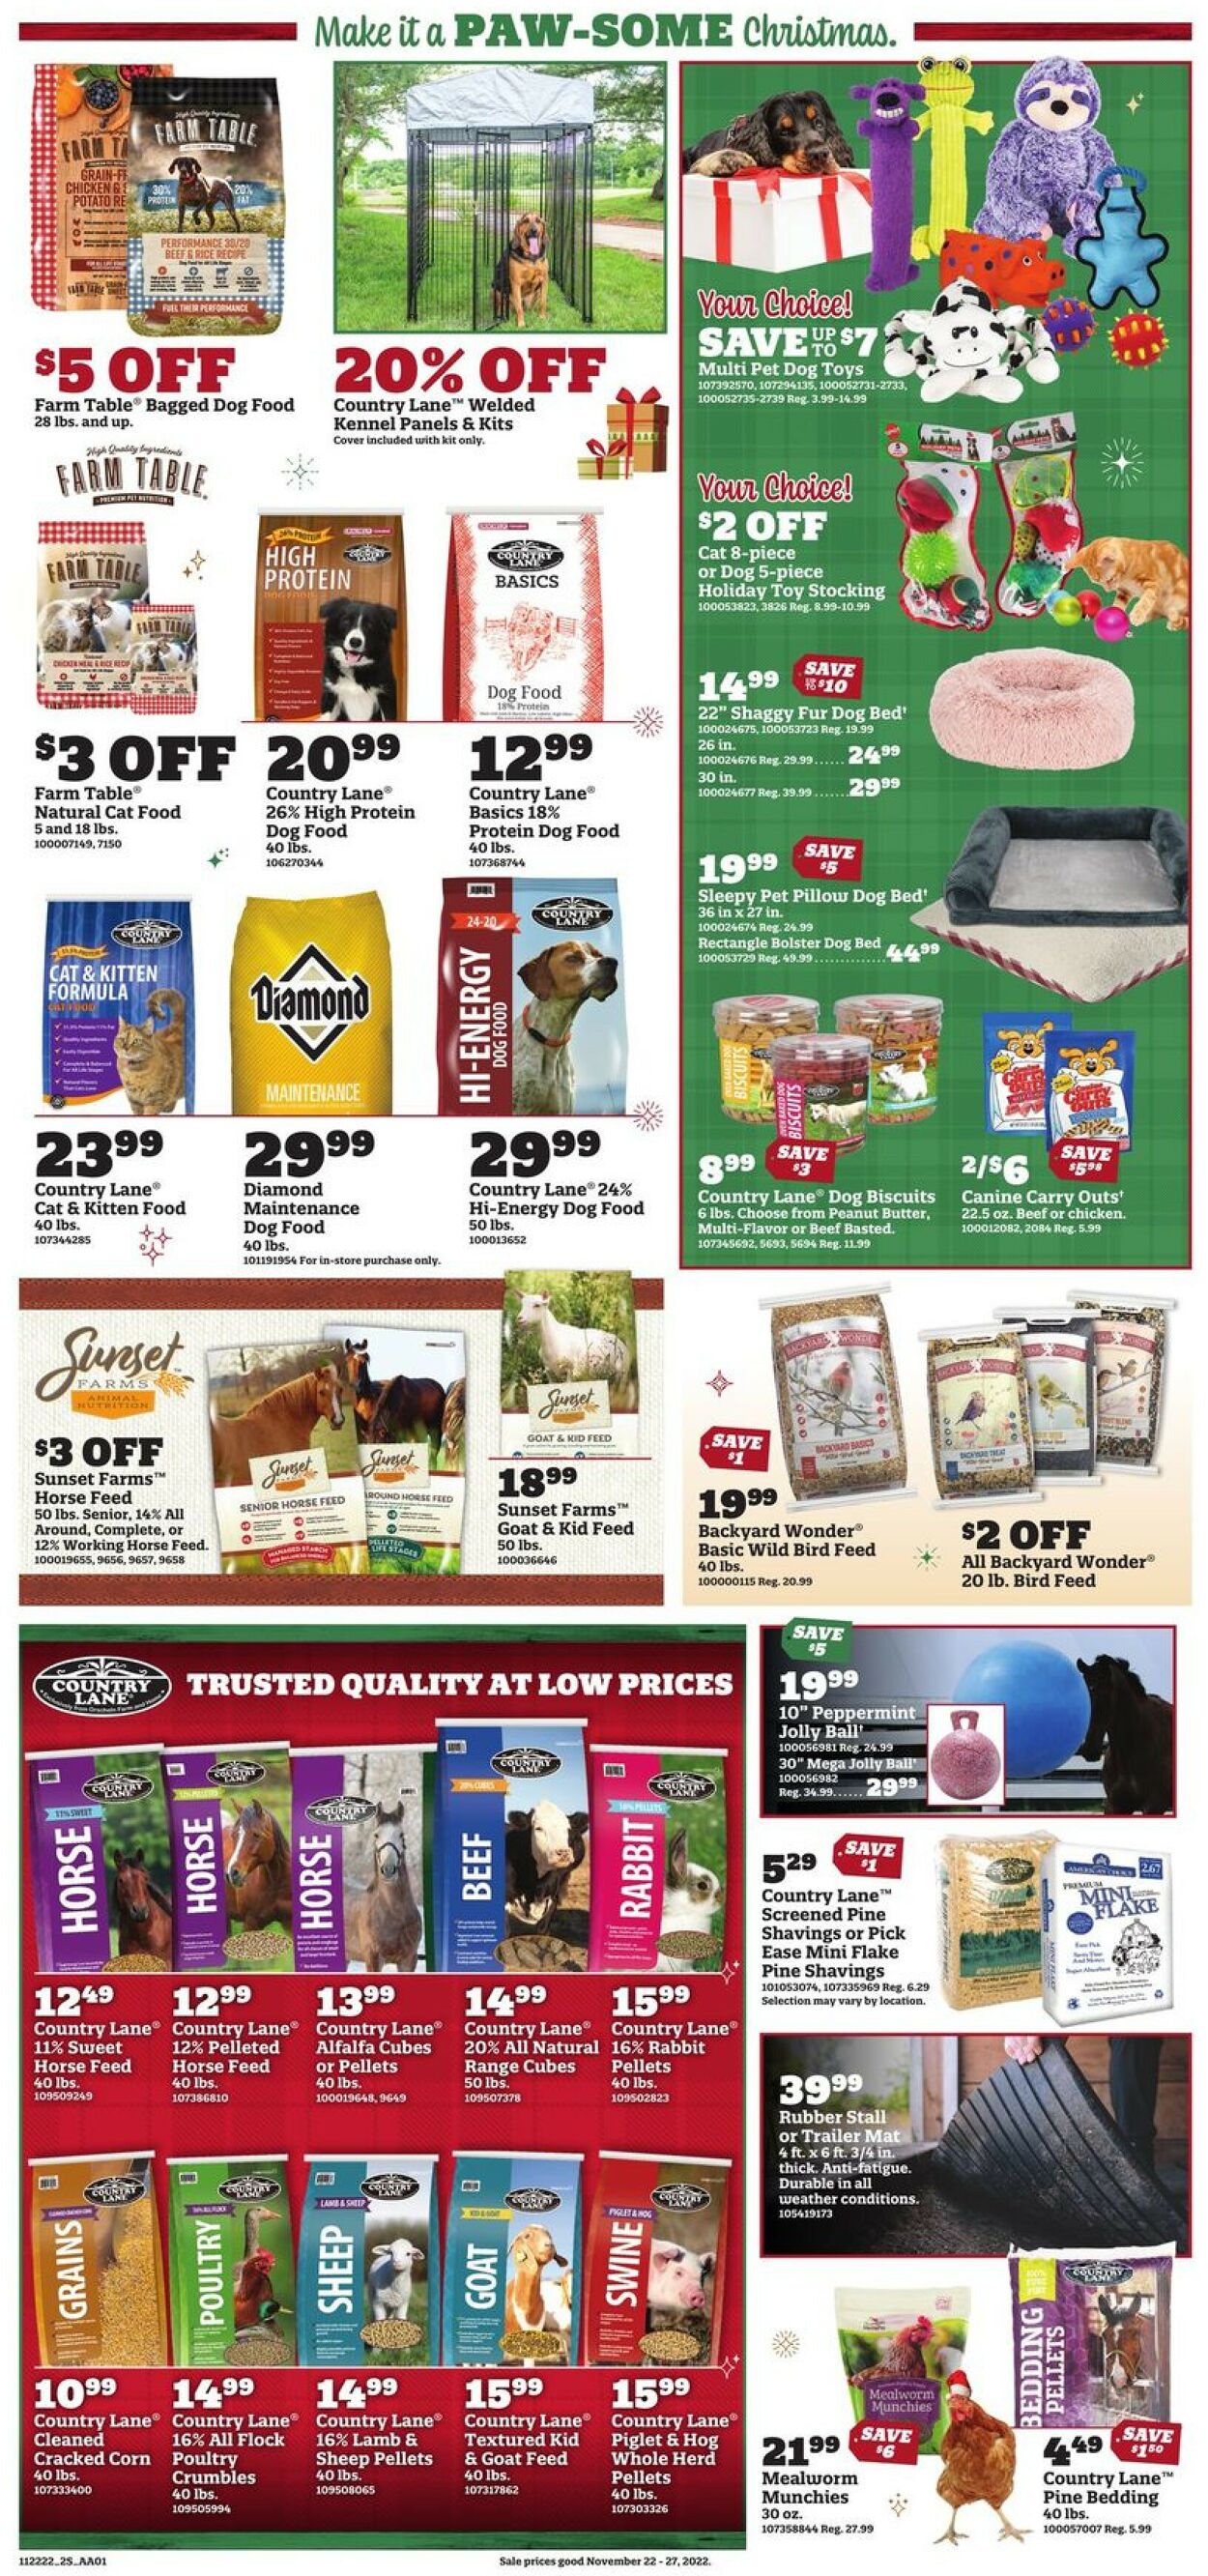 Orscheln Farm and Home Ad from 11/22/2022